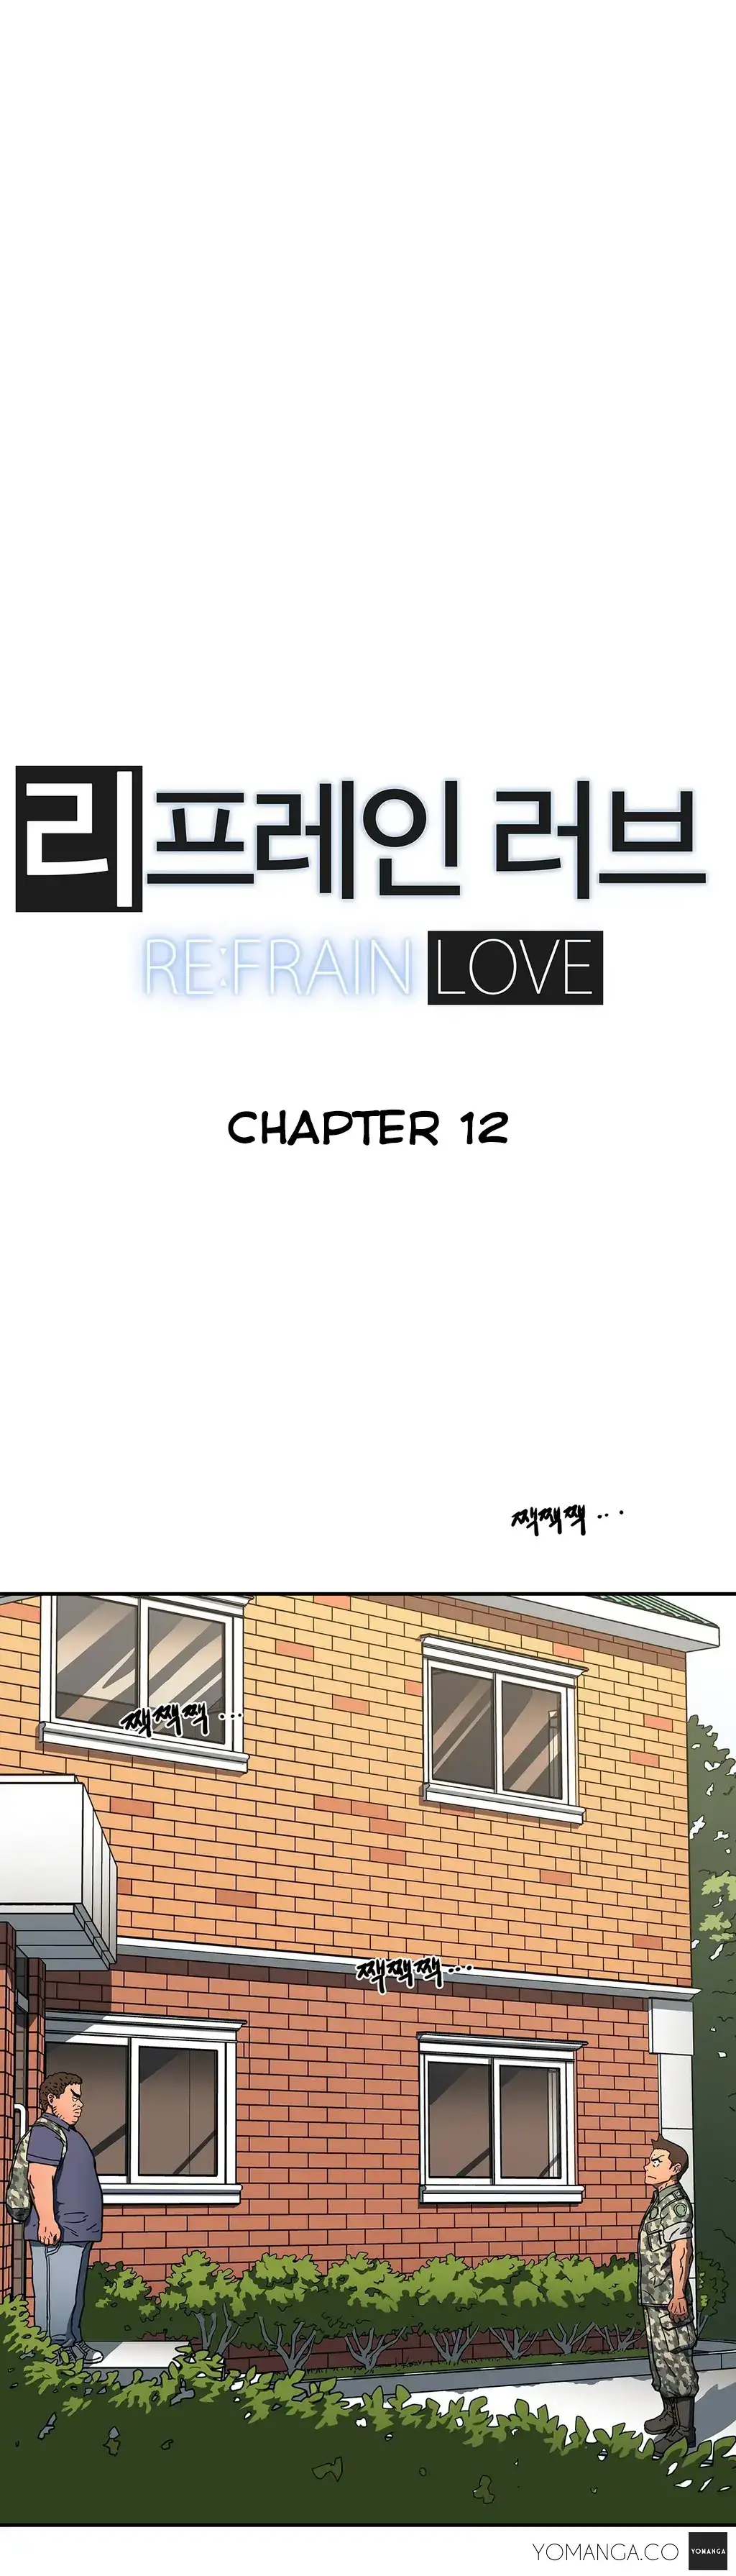 Refrain Love - Chapter 12 Page 2